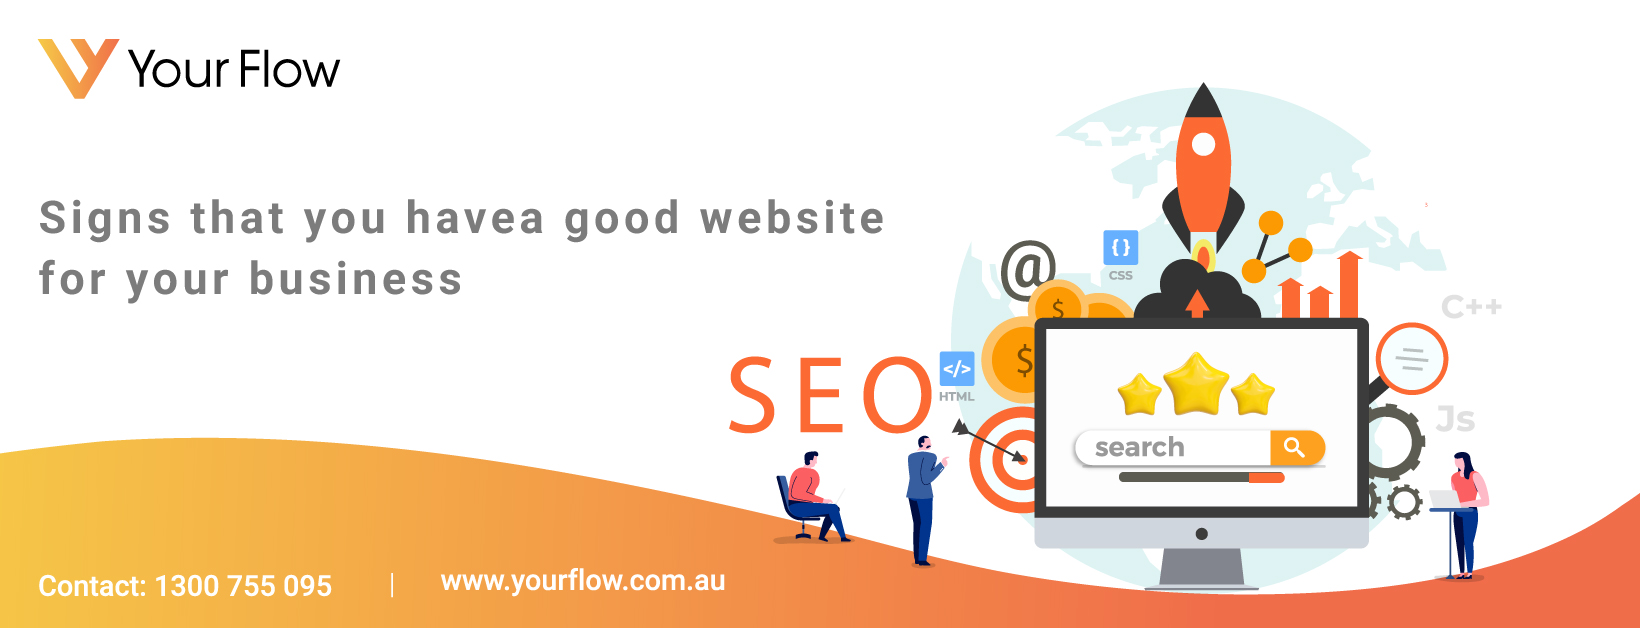 Search Engine Optimisation Australia: Why Does Every Company Need to Create Content?